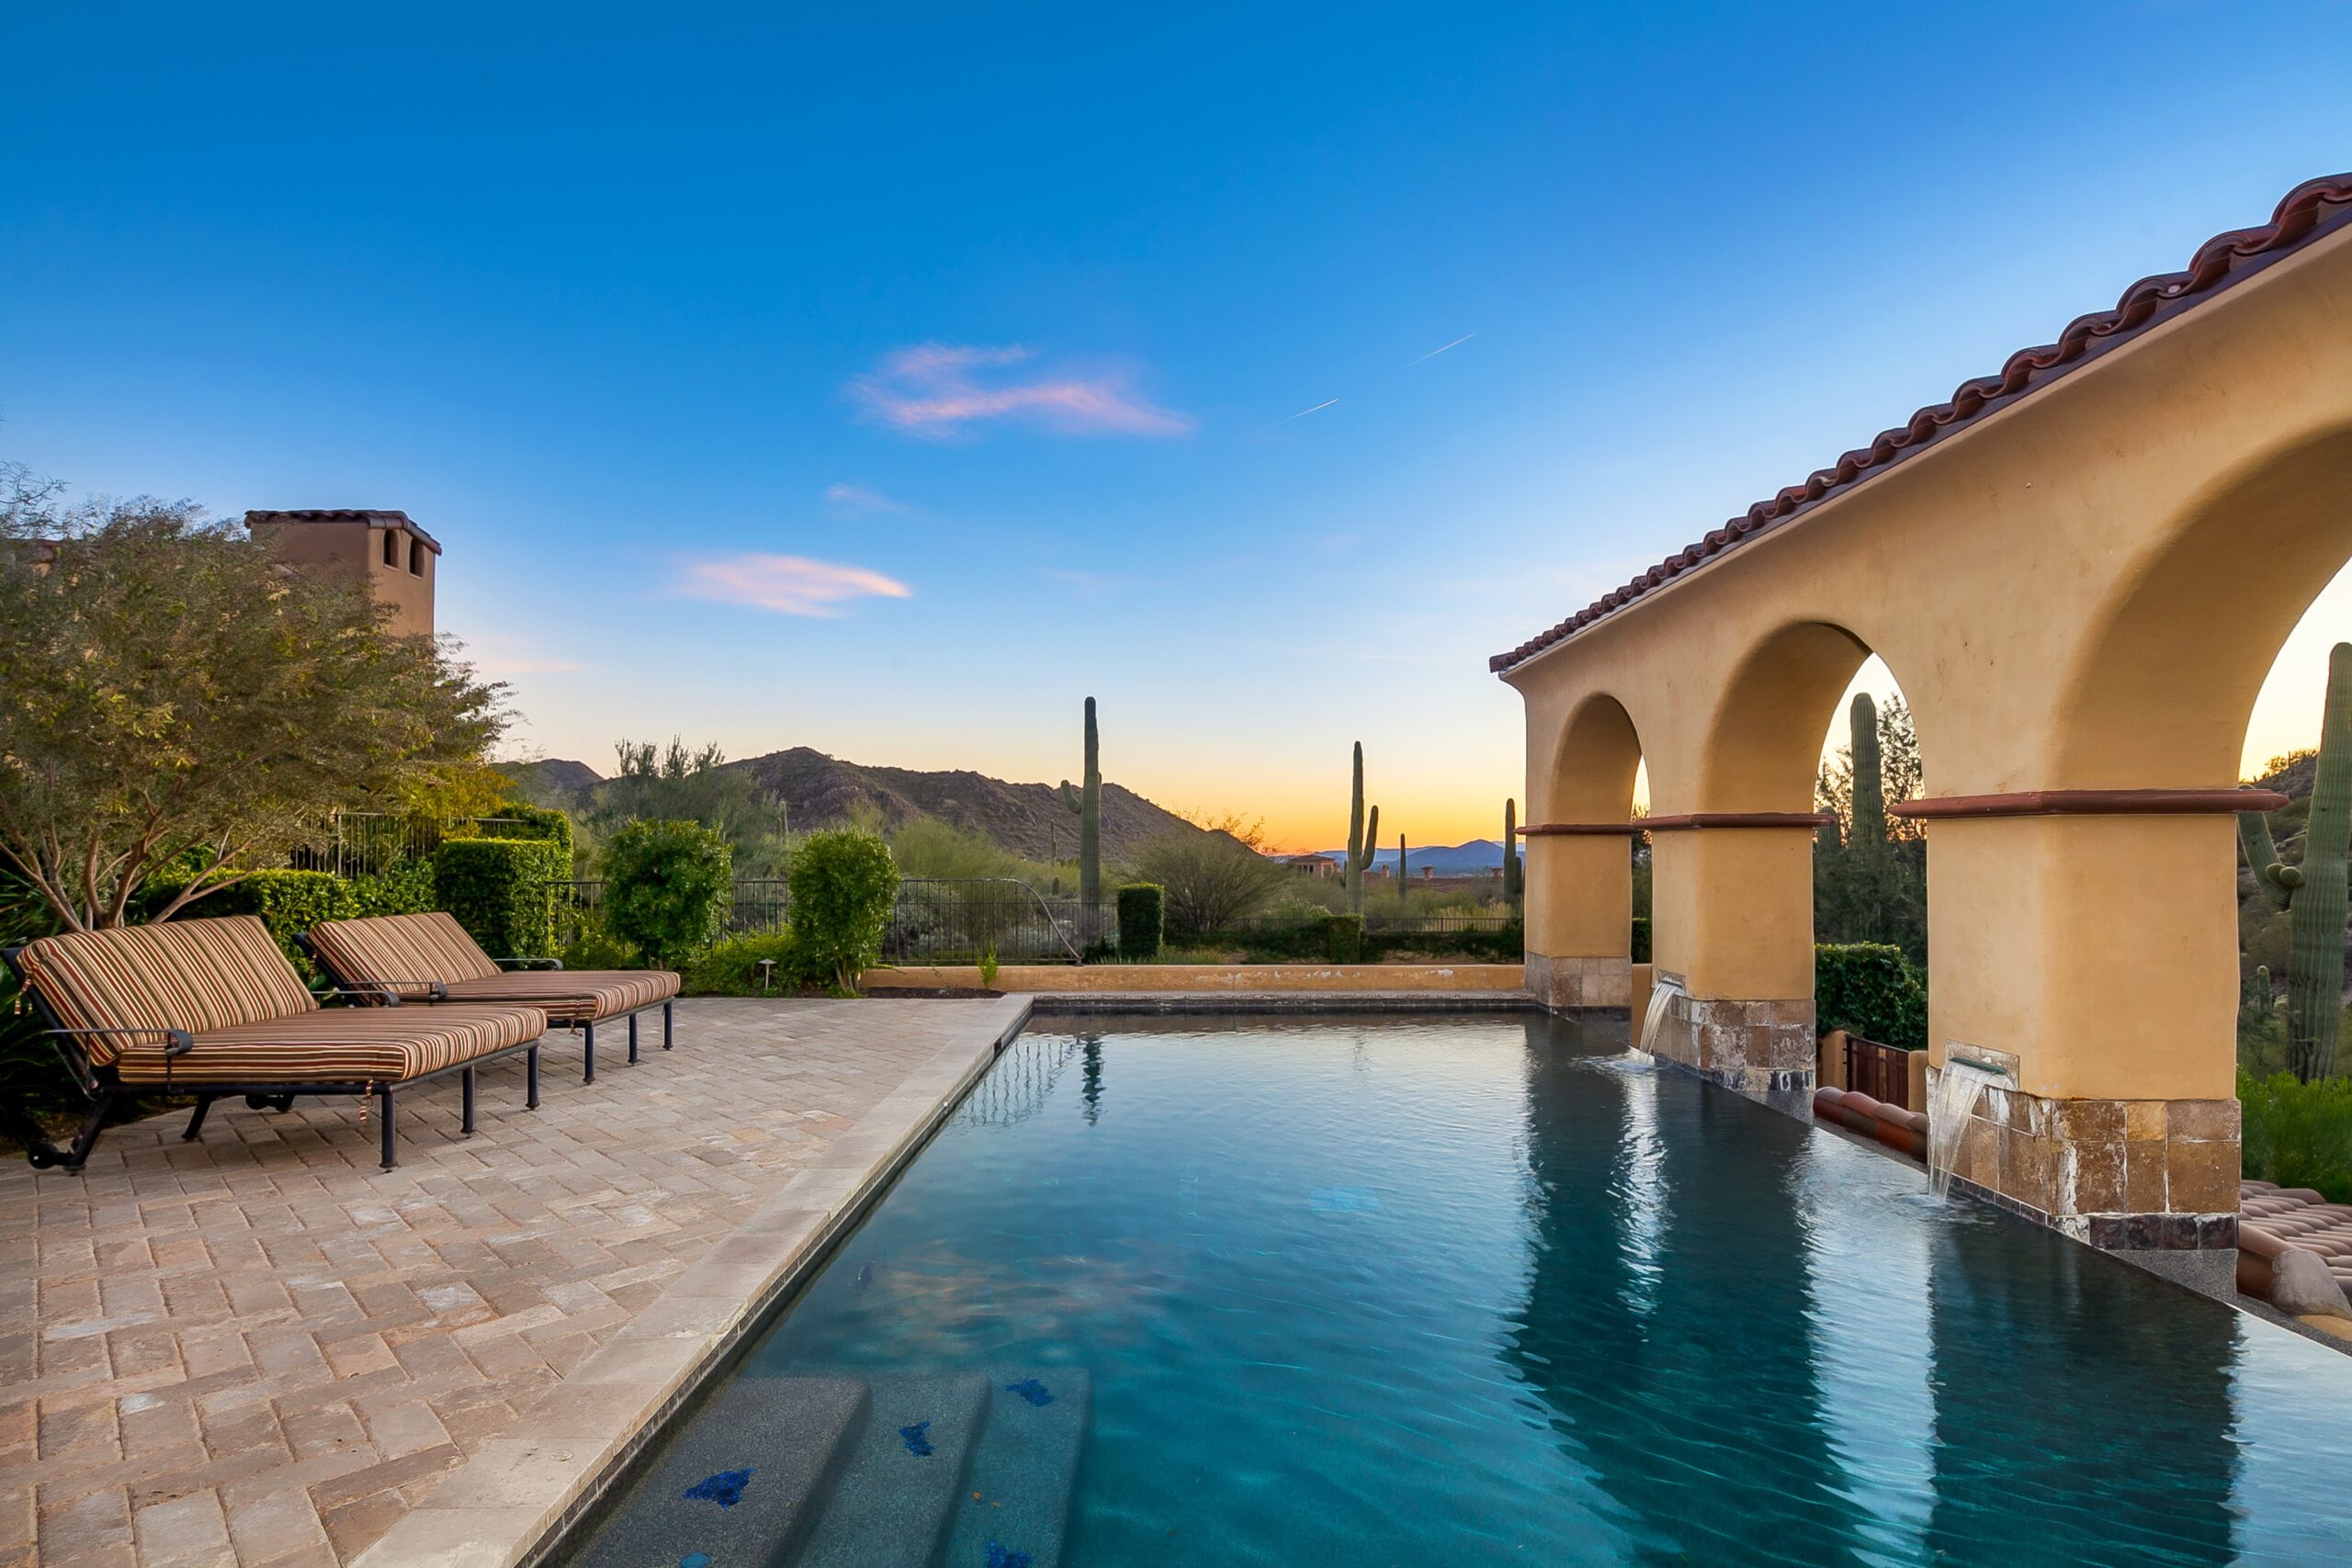 9 tips for keeping your Scottsdale golf home pool ready through winter